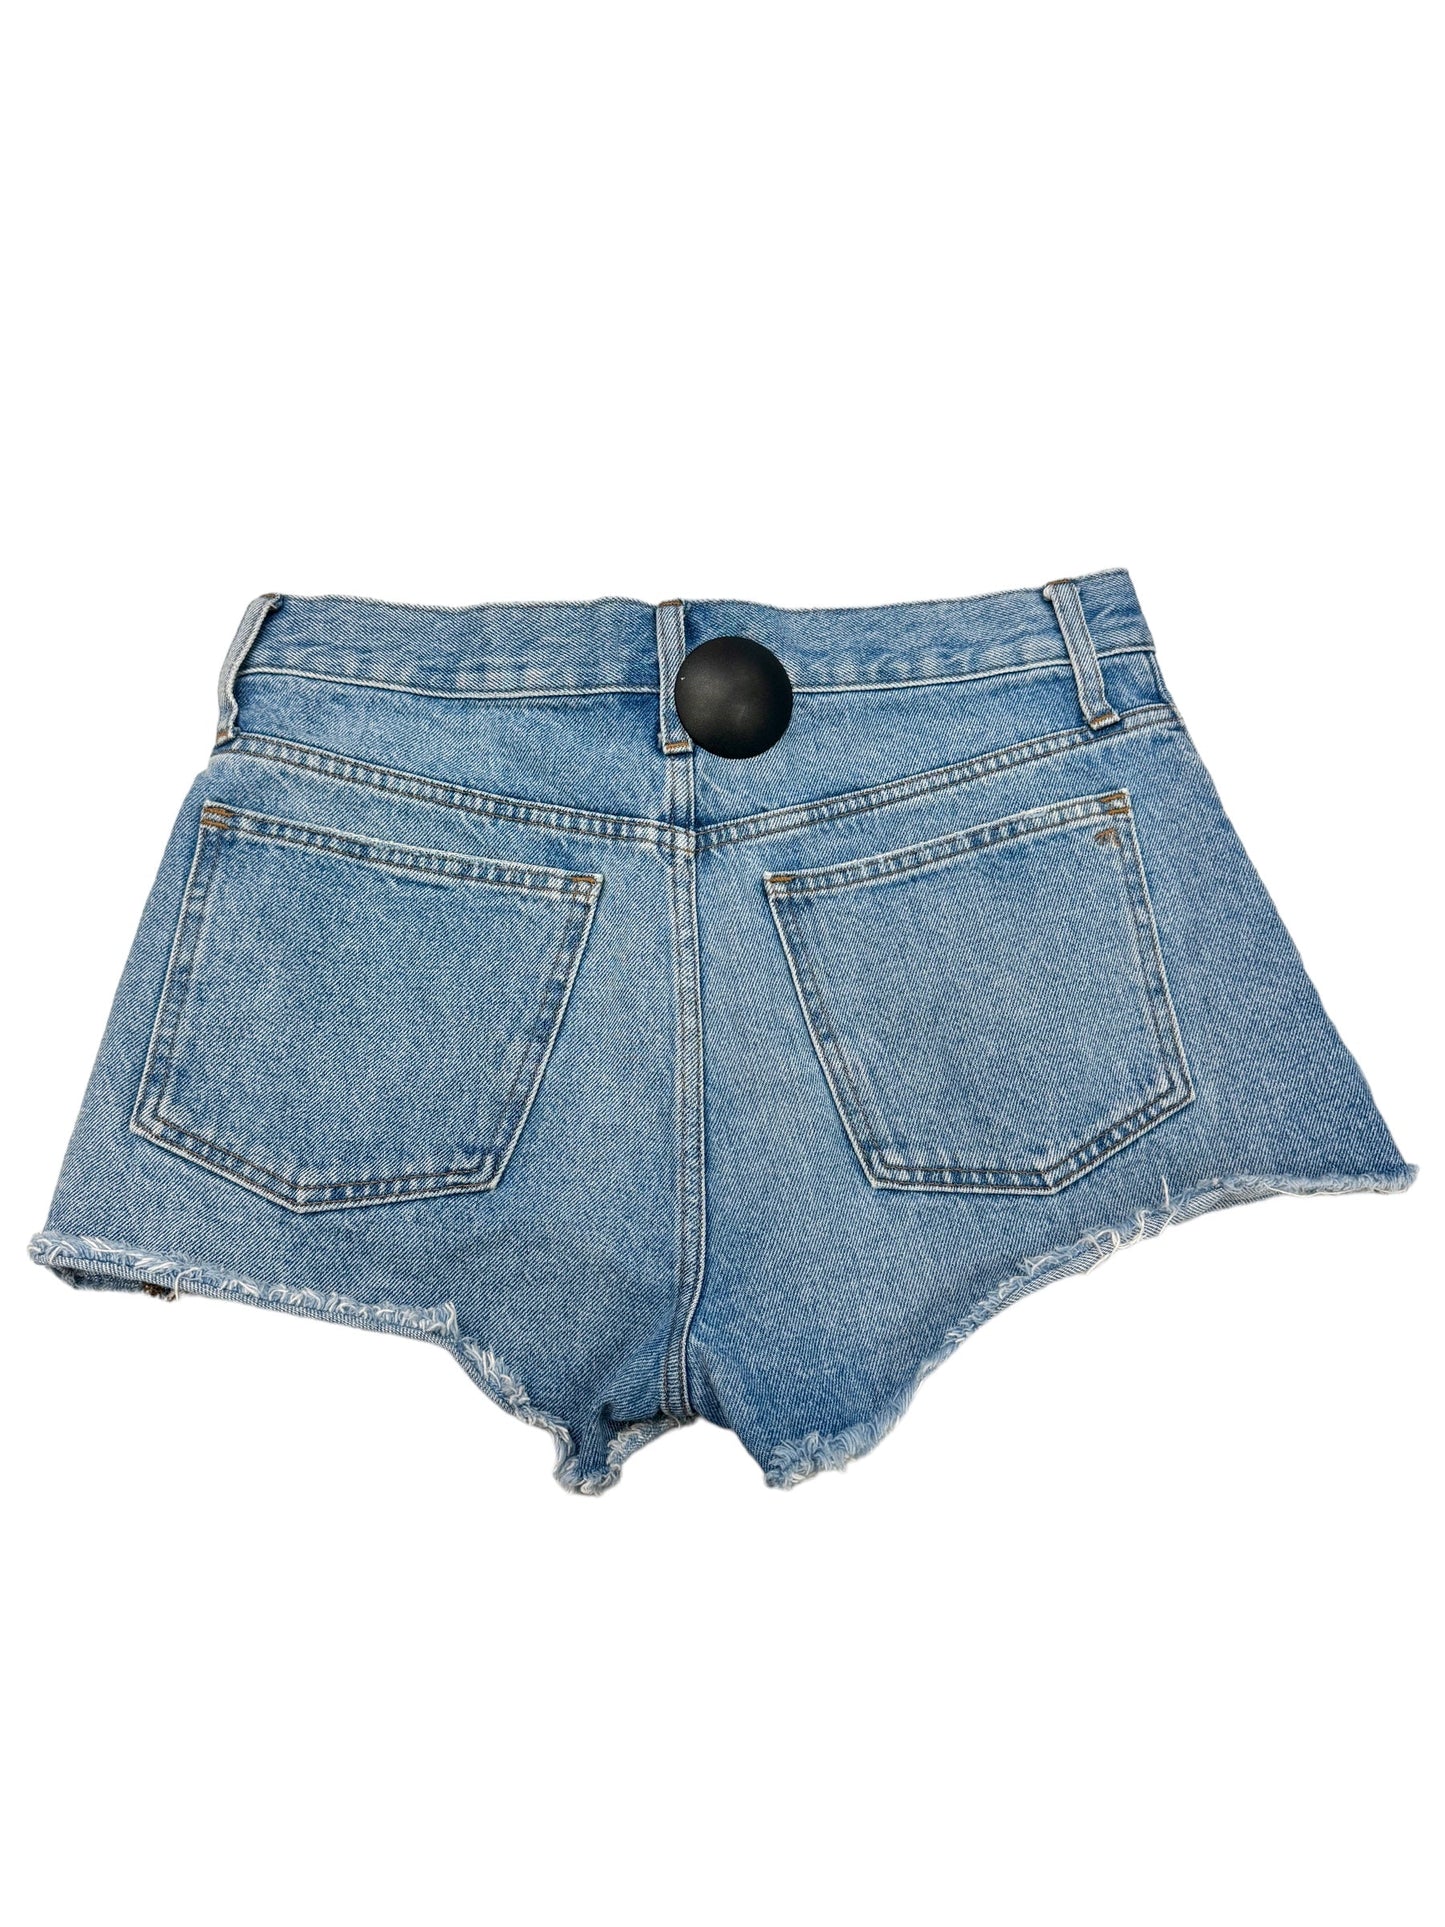 Shorts By Madewell  Size: 8